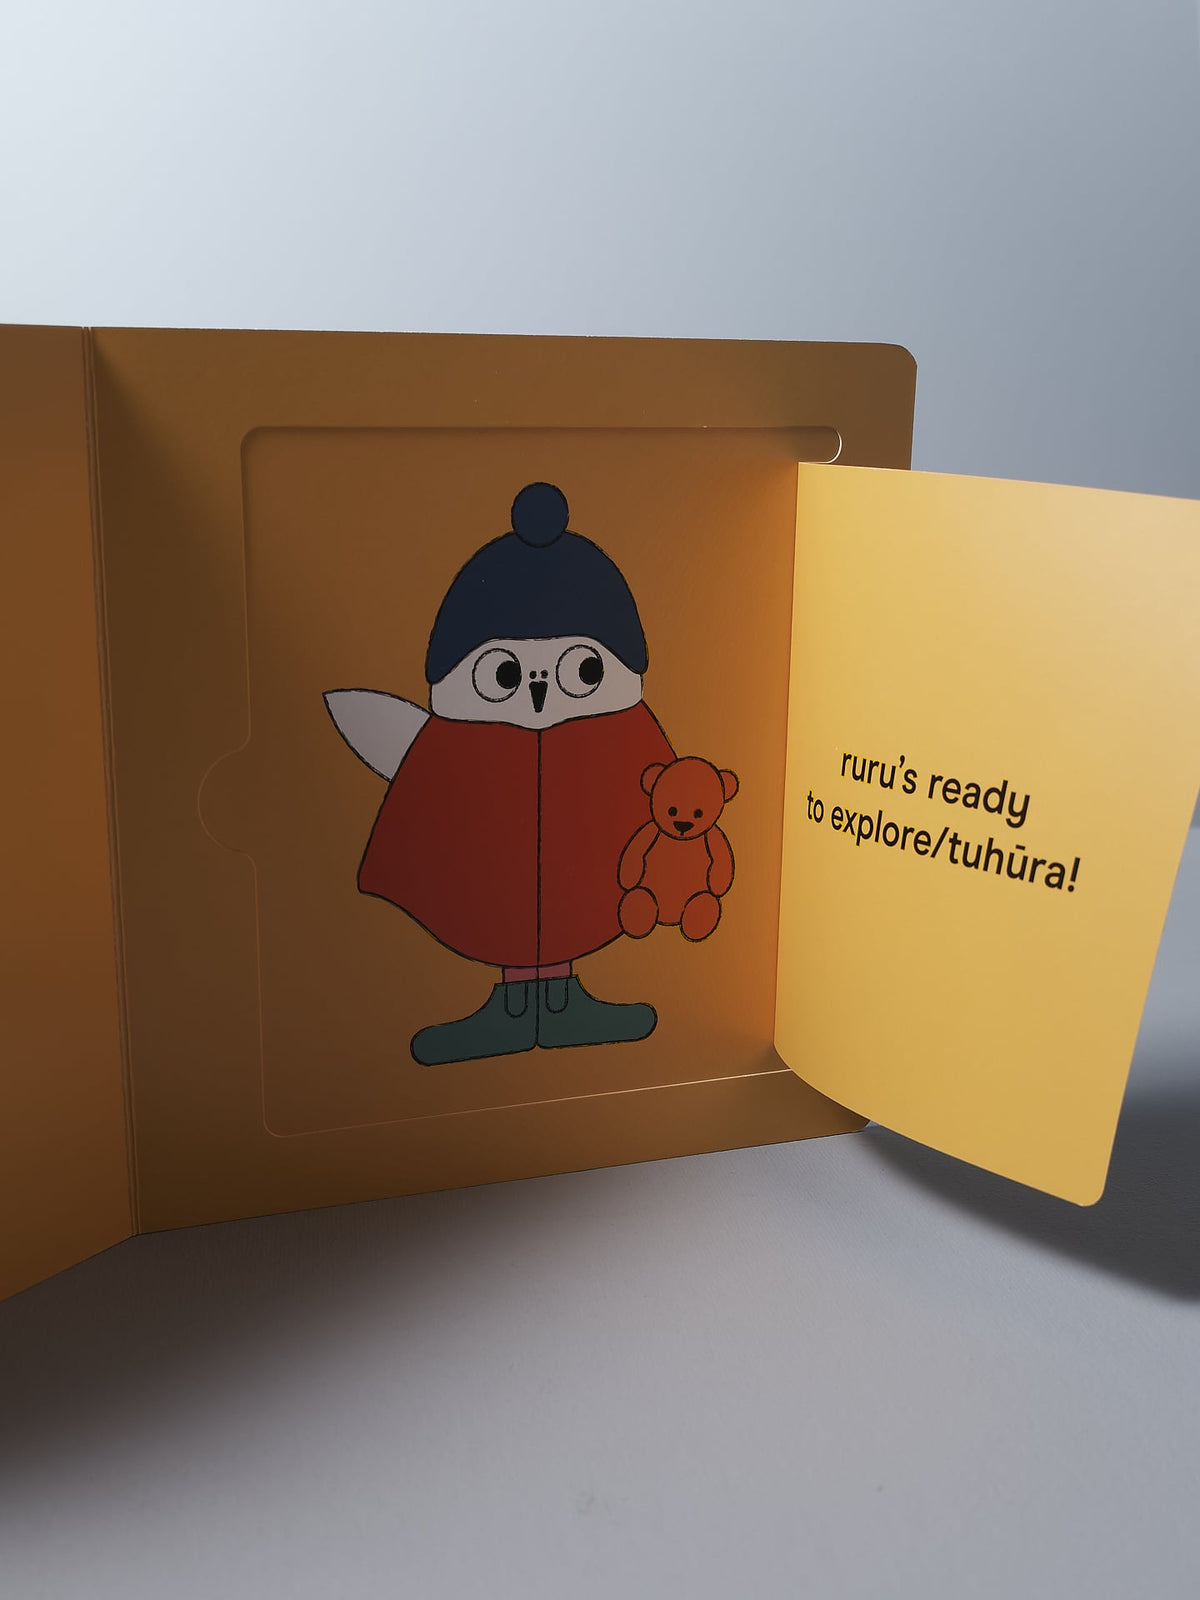 A Let&#39;s Go Ruru - by Kate Muir, an owl with a beanie and glasses, holding a teddy bear, depicted on a foldable card with the phrase &quot;Ruru&#39;s ready for an